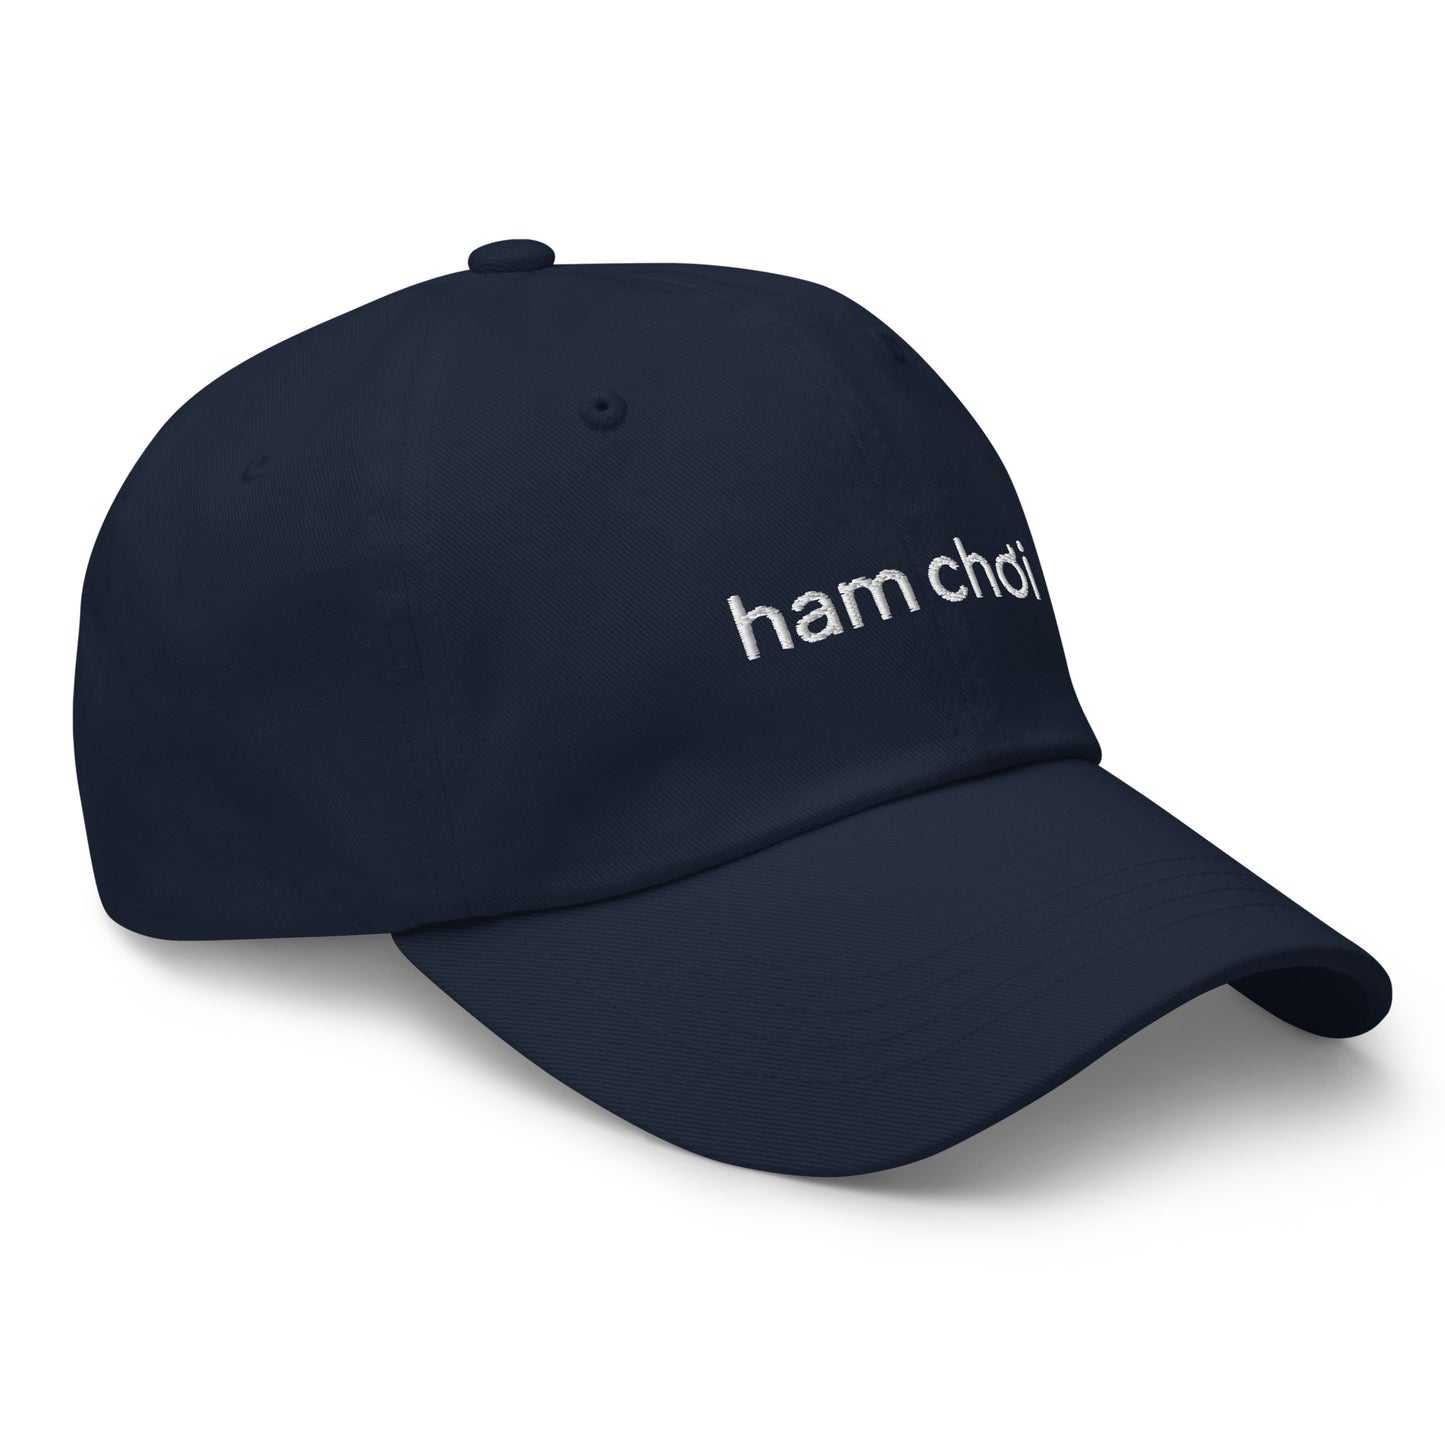 Ham Chơi Vietnamese Dad hat, Embroidered Baseball Cap | Multiple Colors Available!